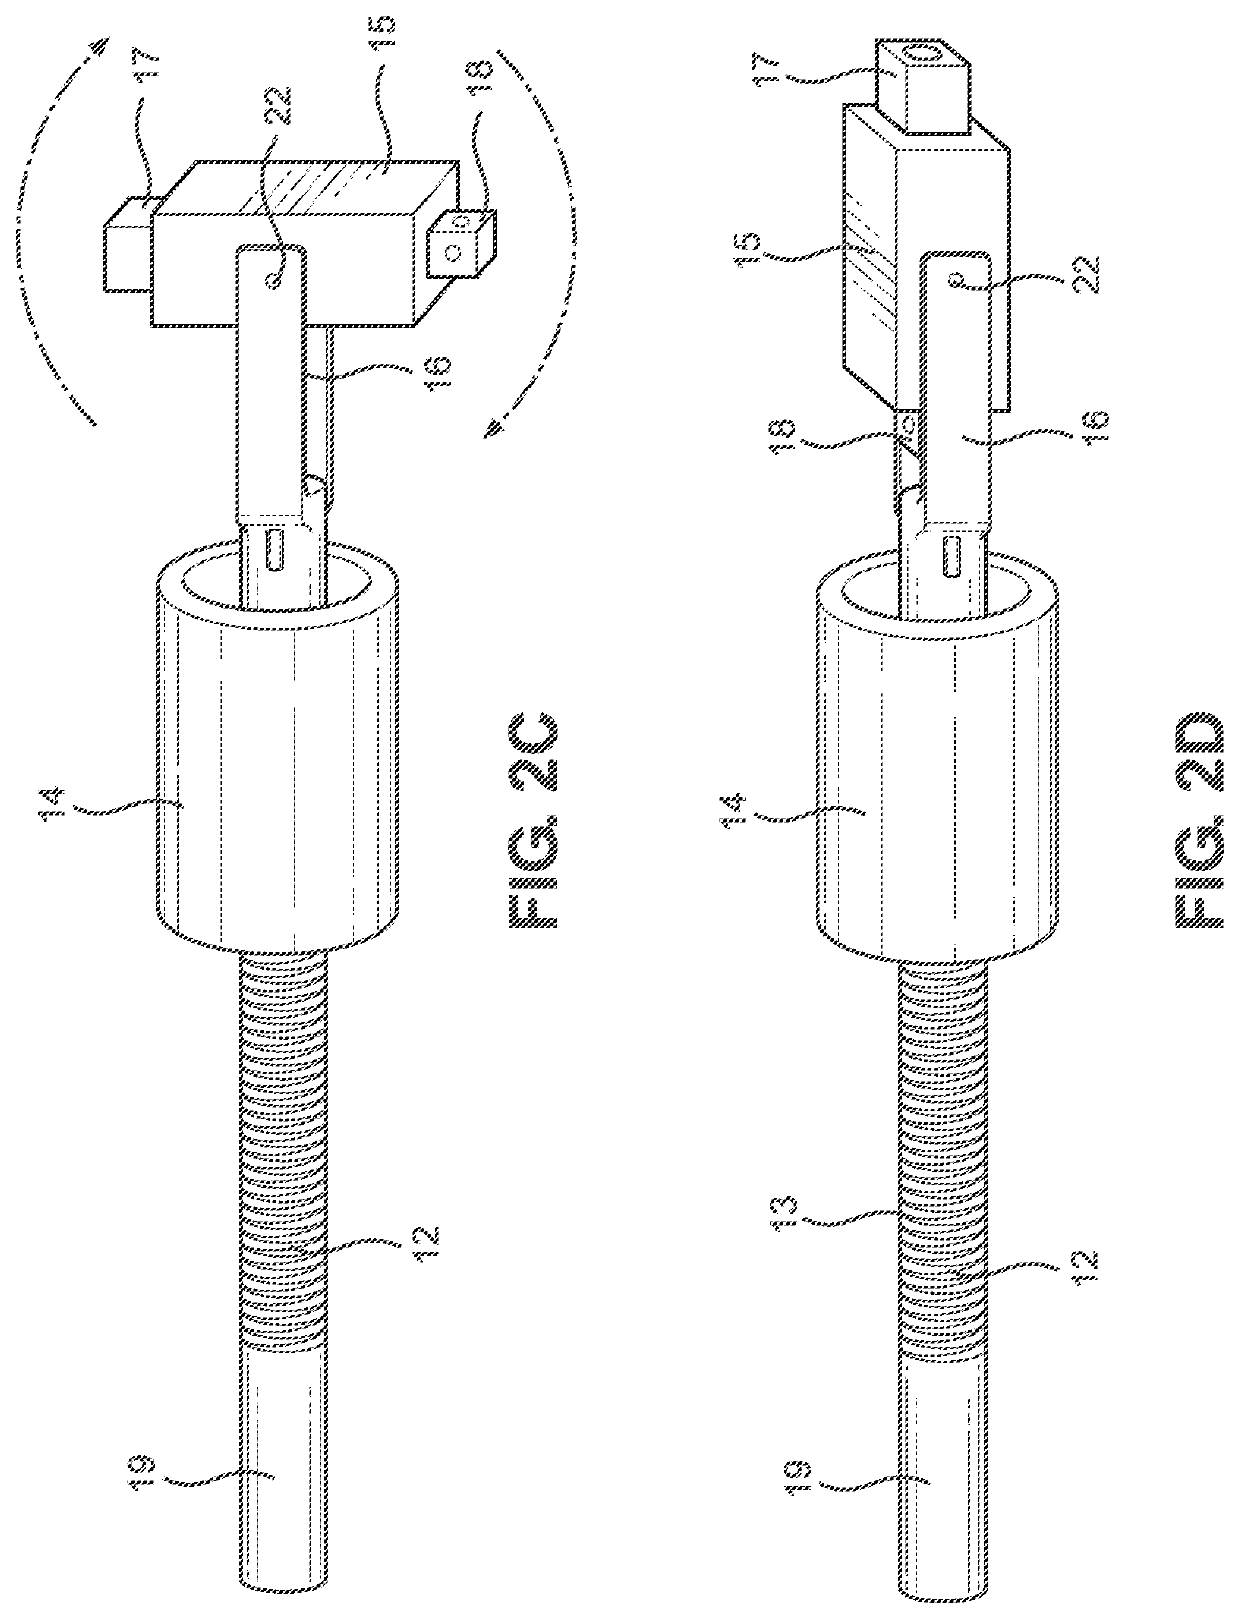 Tool Adapter with a Slidable Collar and a Plurality of Socket Adapters